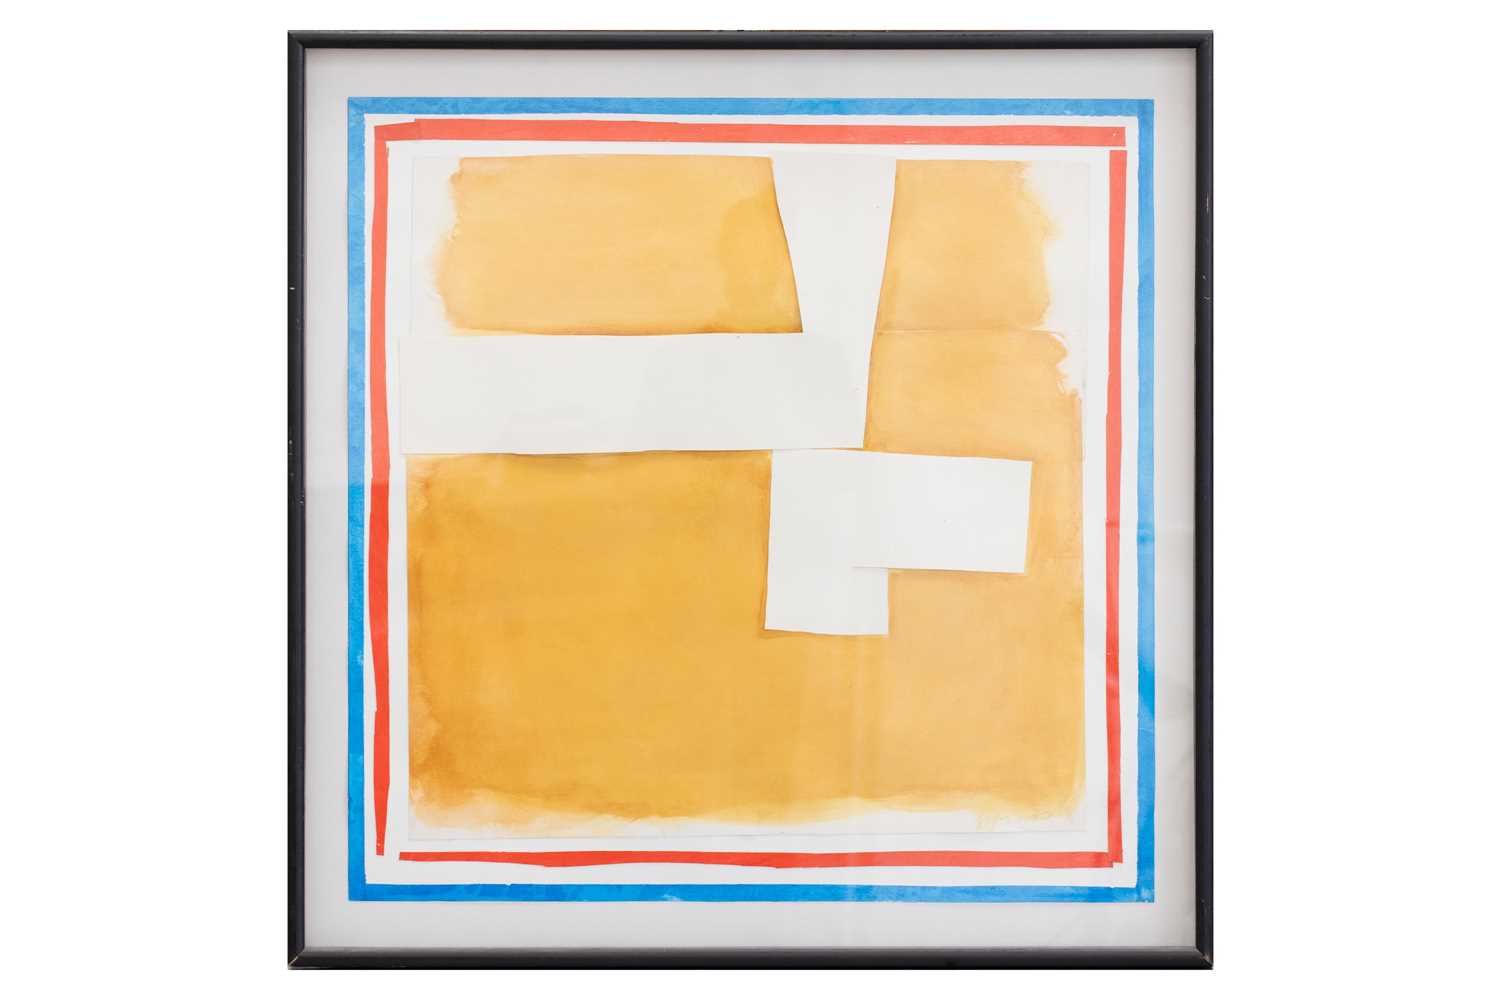 Sandra Blow (1925 - 2006), Abstract in Ochre, signed and dated 'Blow '93' (lower right), mixed media